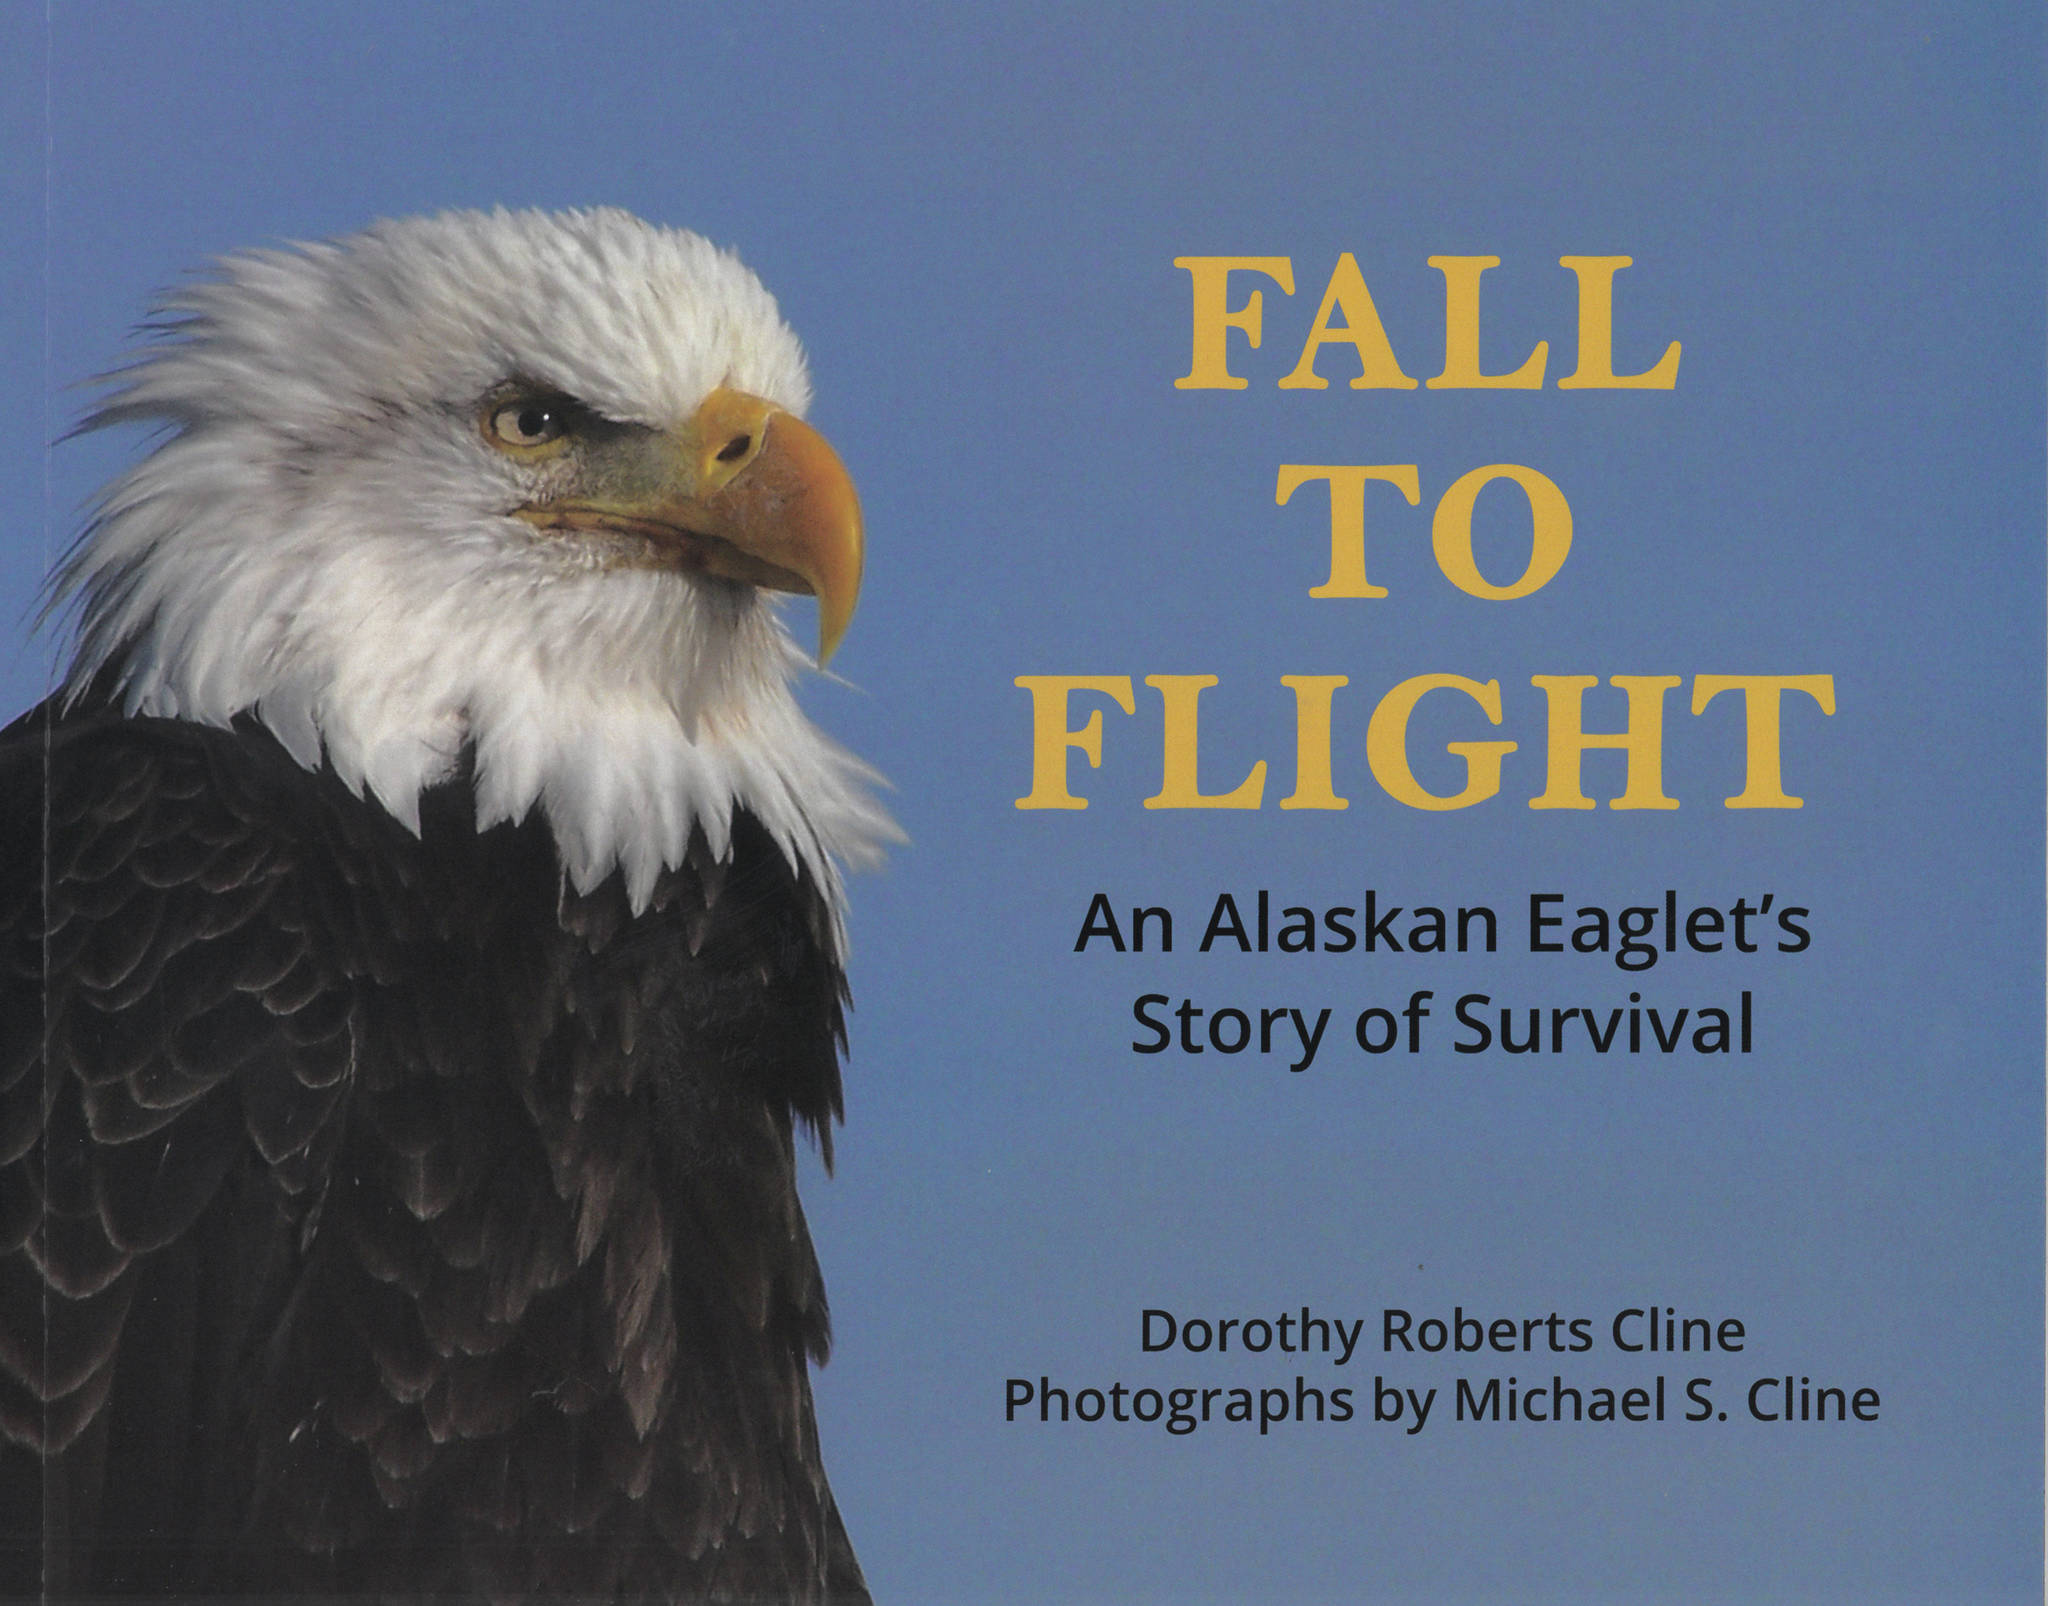 The cover to Dorothy Roberts Cline’s book, “Fall to Flight: An Alaskan Eaglet’s Story of Survival,” uses a photo by the late Michael S. Cline. (Image courtesy of Dorothy Roberts Cline)